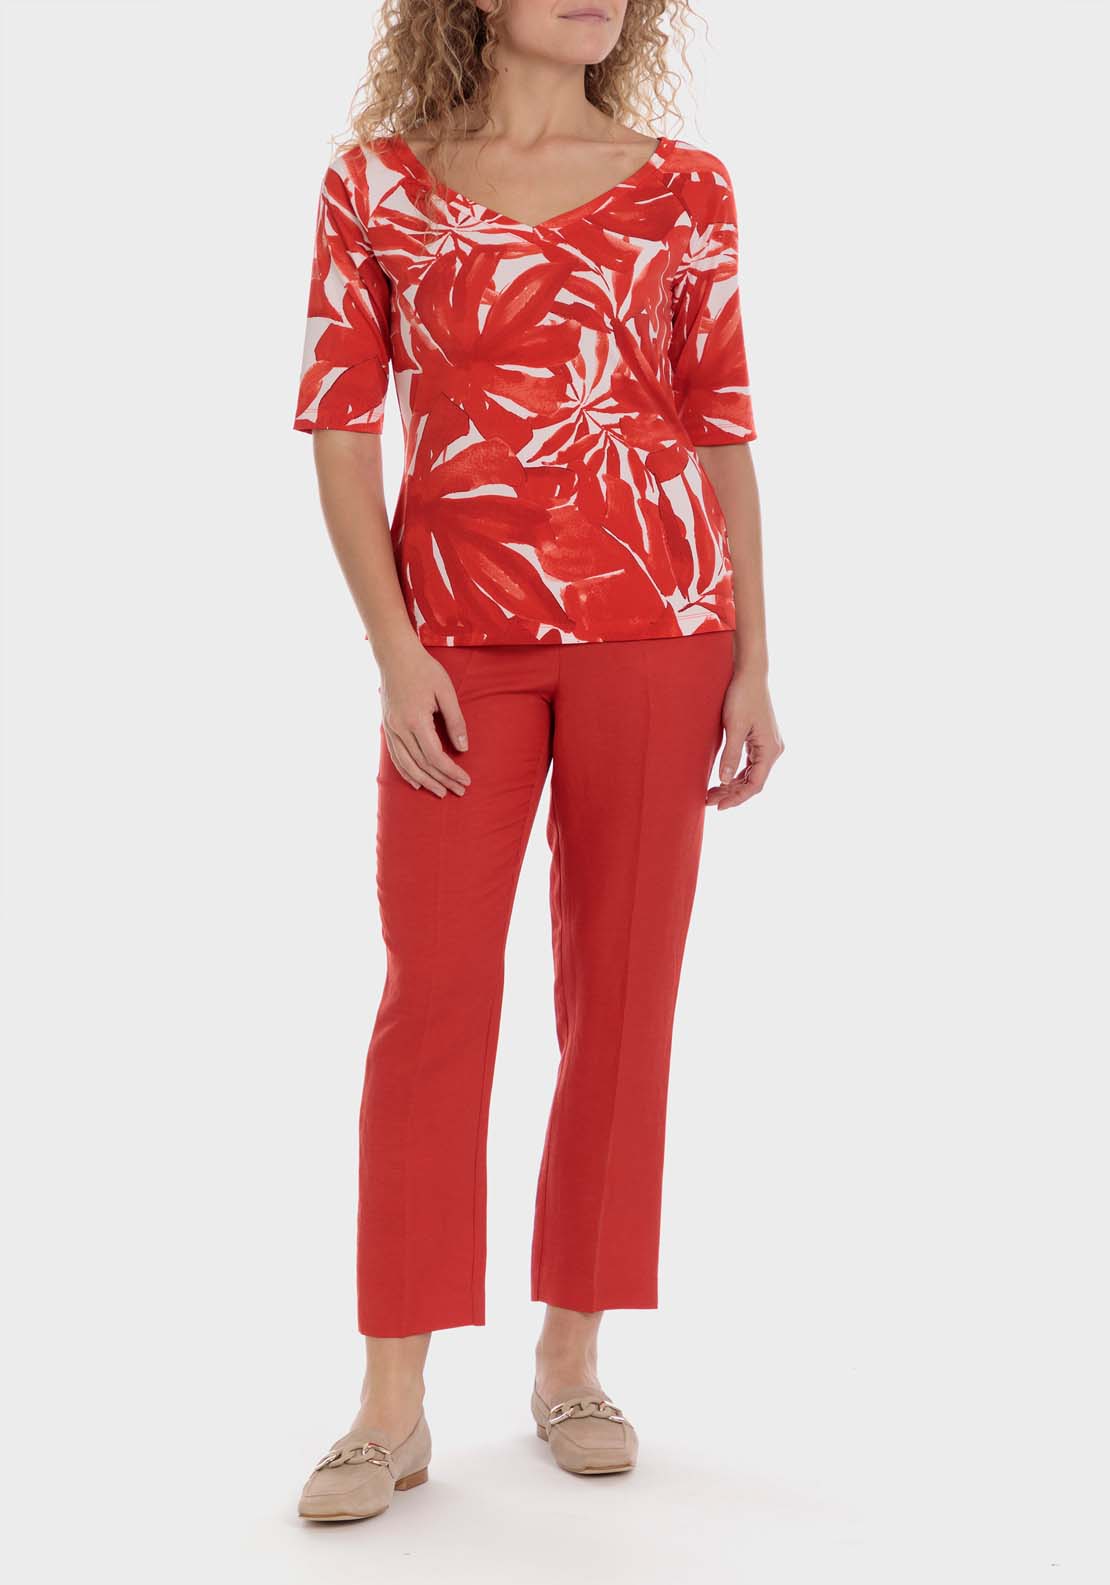 Punt Roma Tropical Print T-Shirt - Red 3 Shaws Department Stores